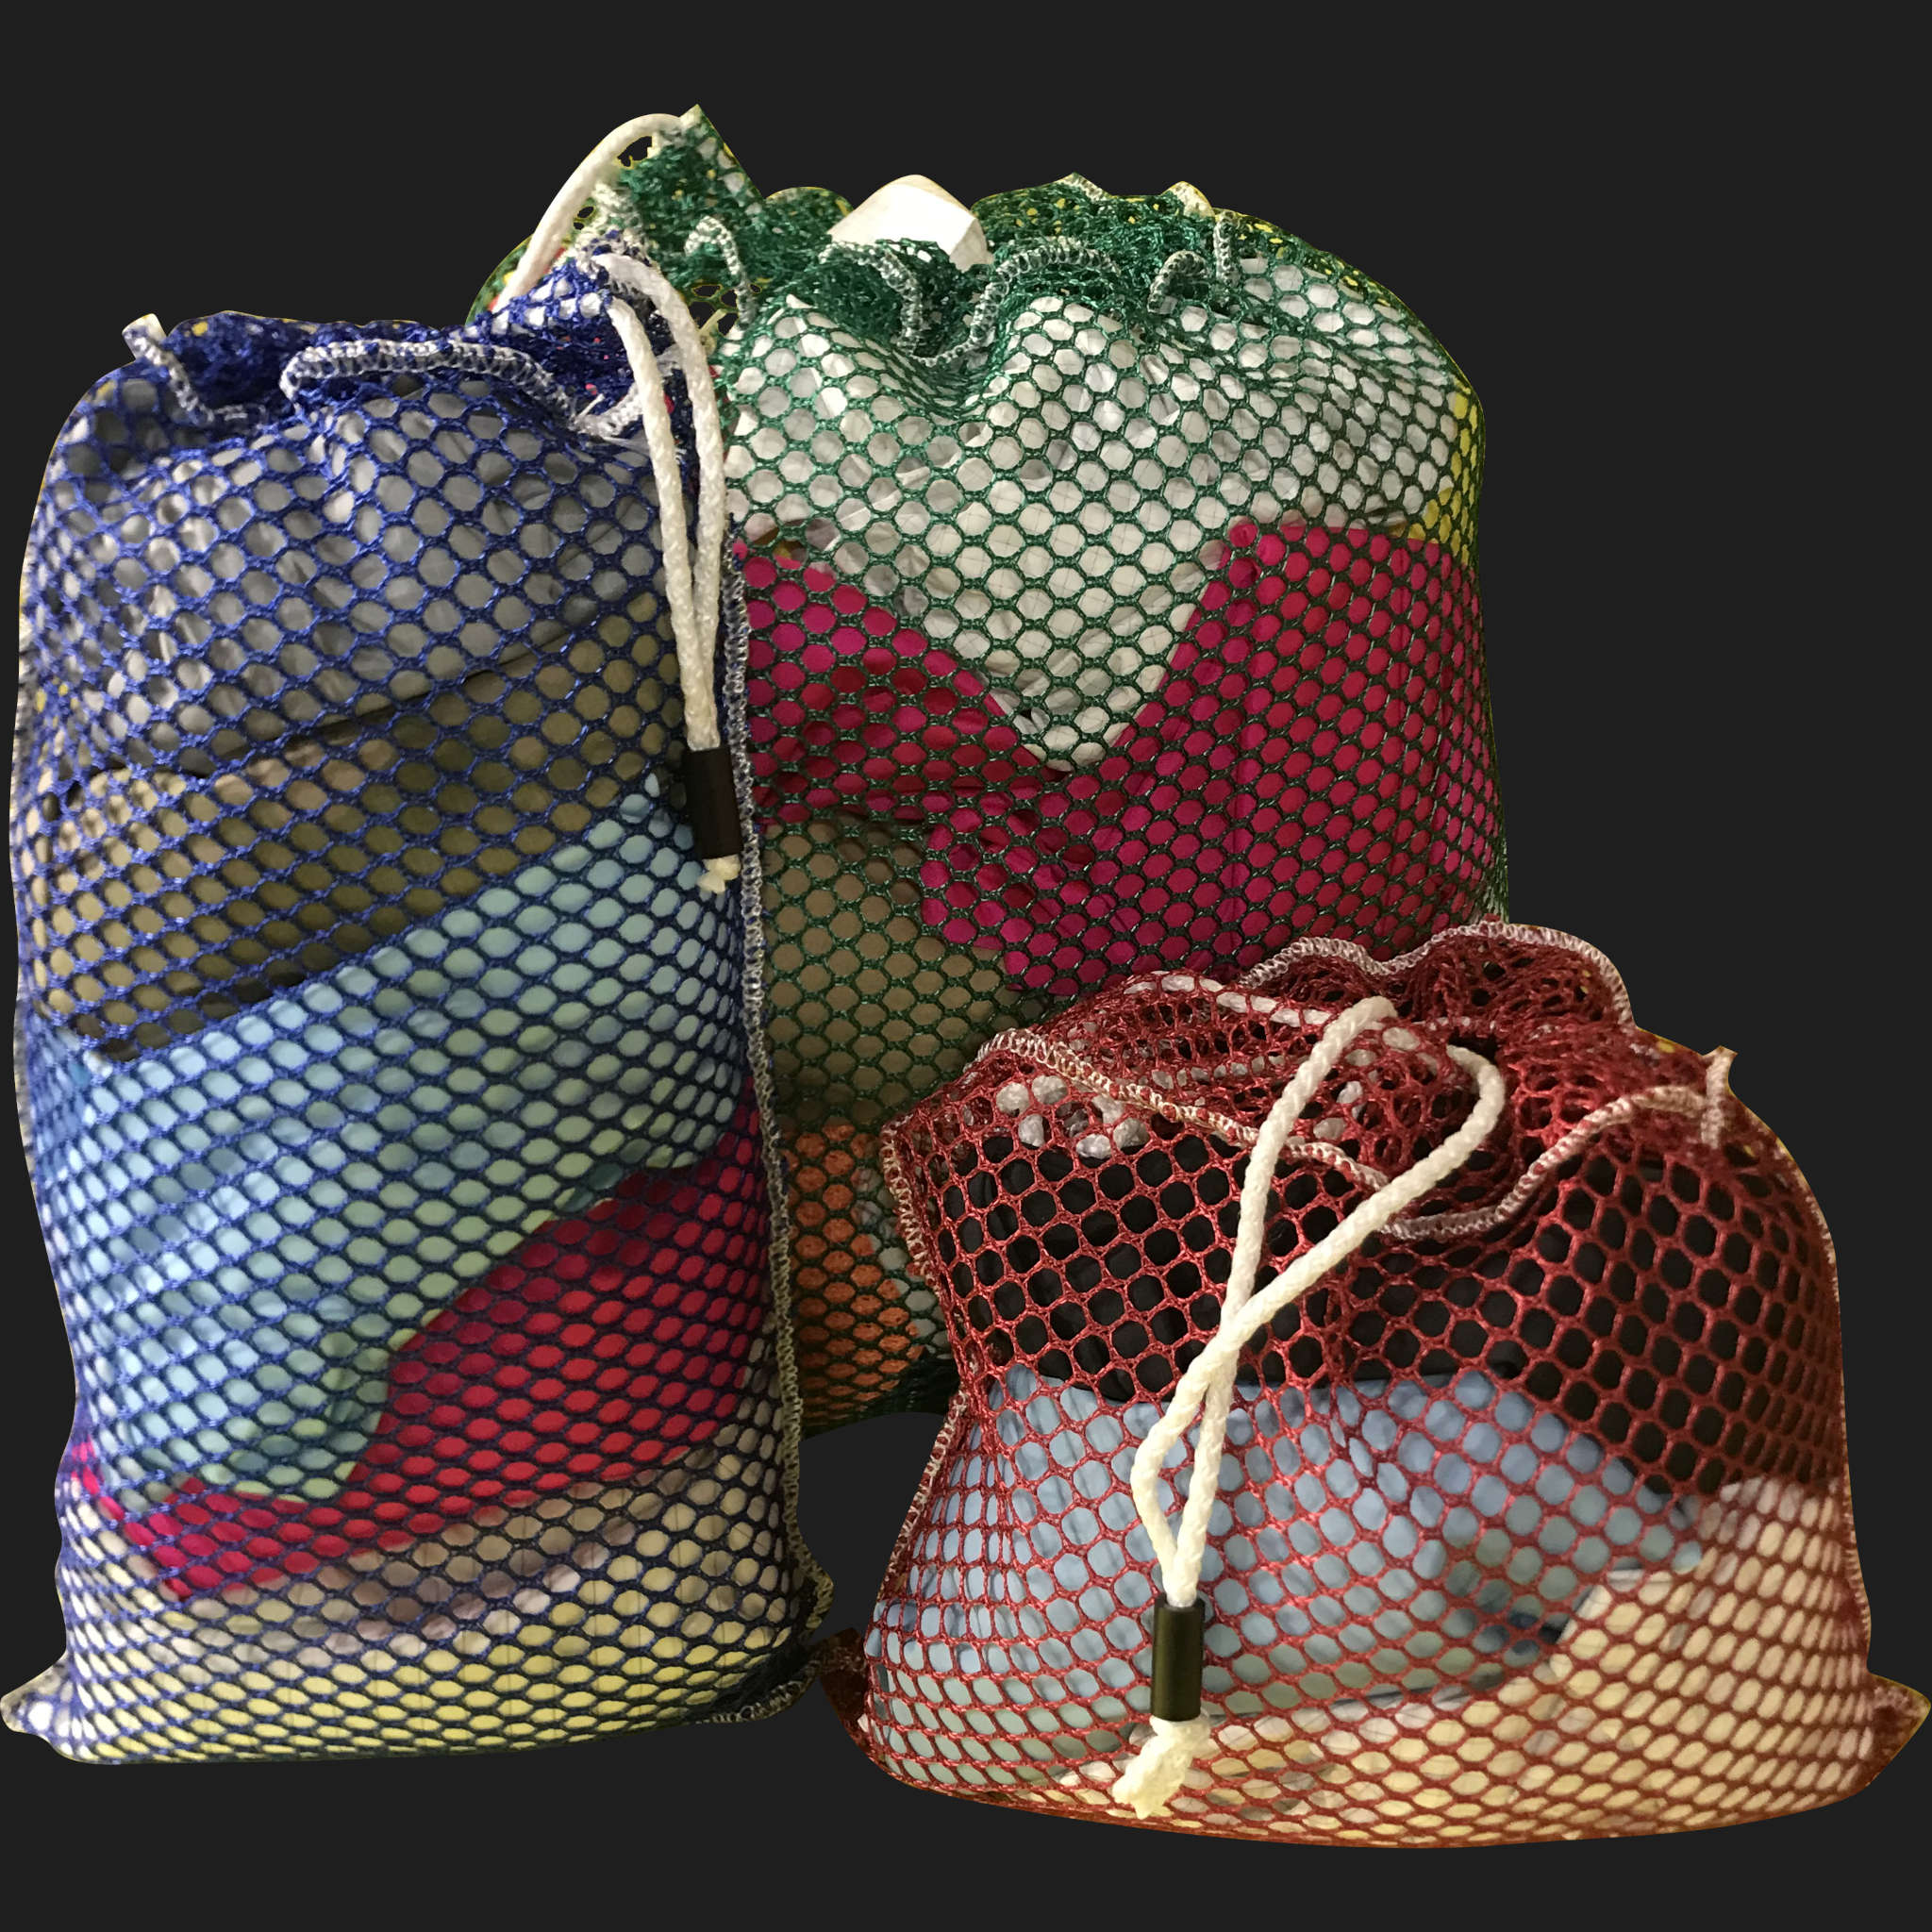 48" x 52" Customized Mesh-Net-Laundry Bags Heavy Duty with Cord and barrellock closure